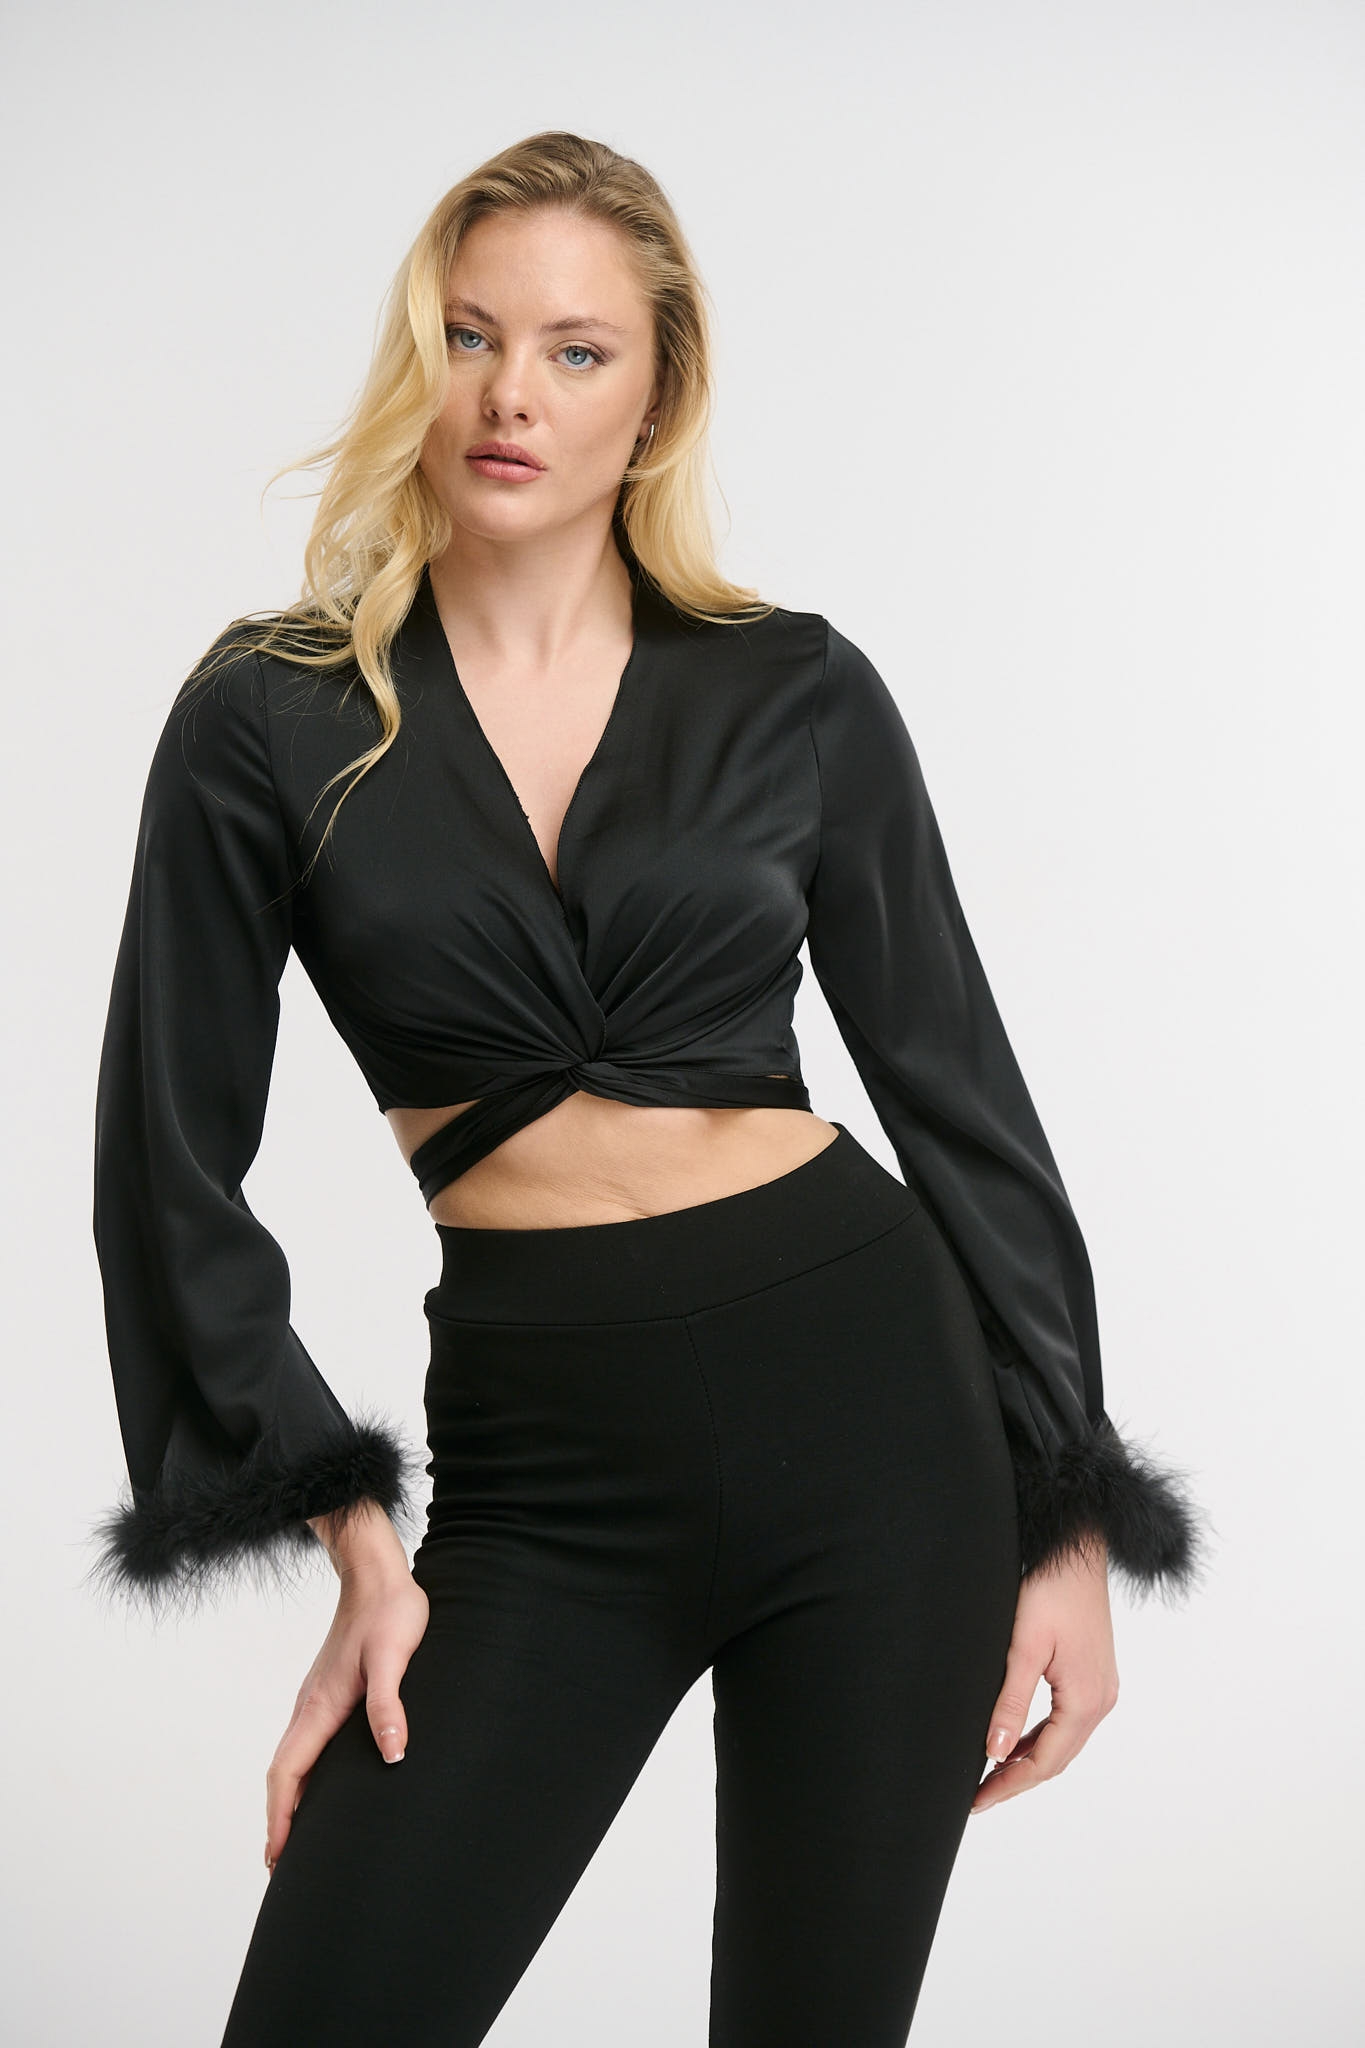 Satin Wrap Top With Feathers On The Sleeves